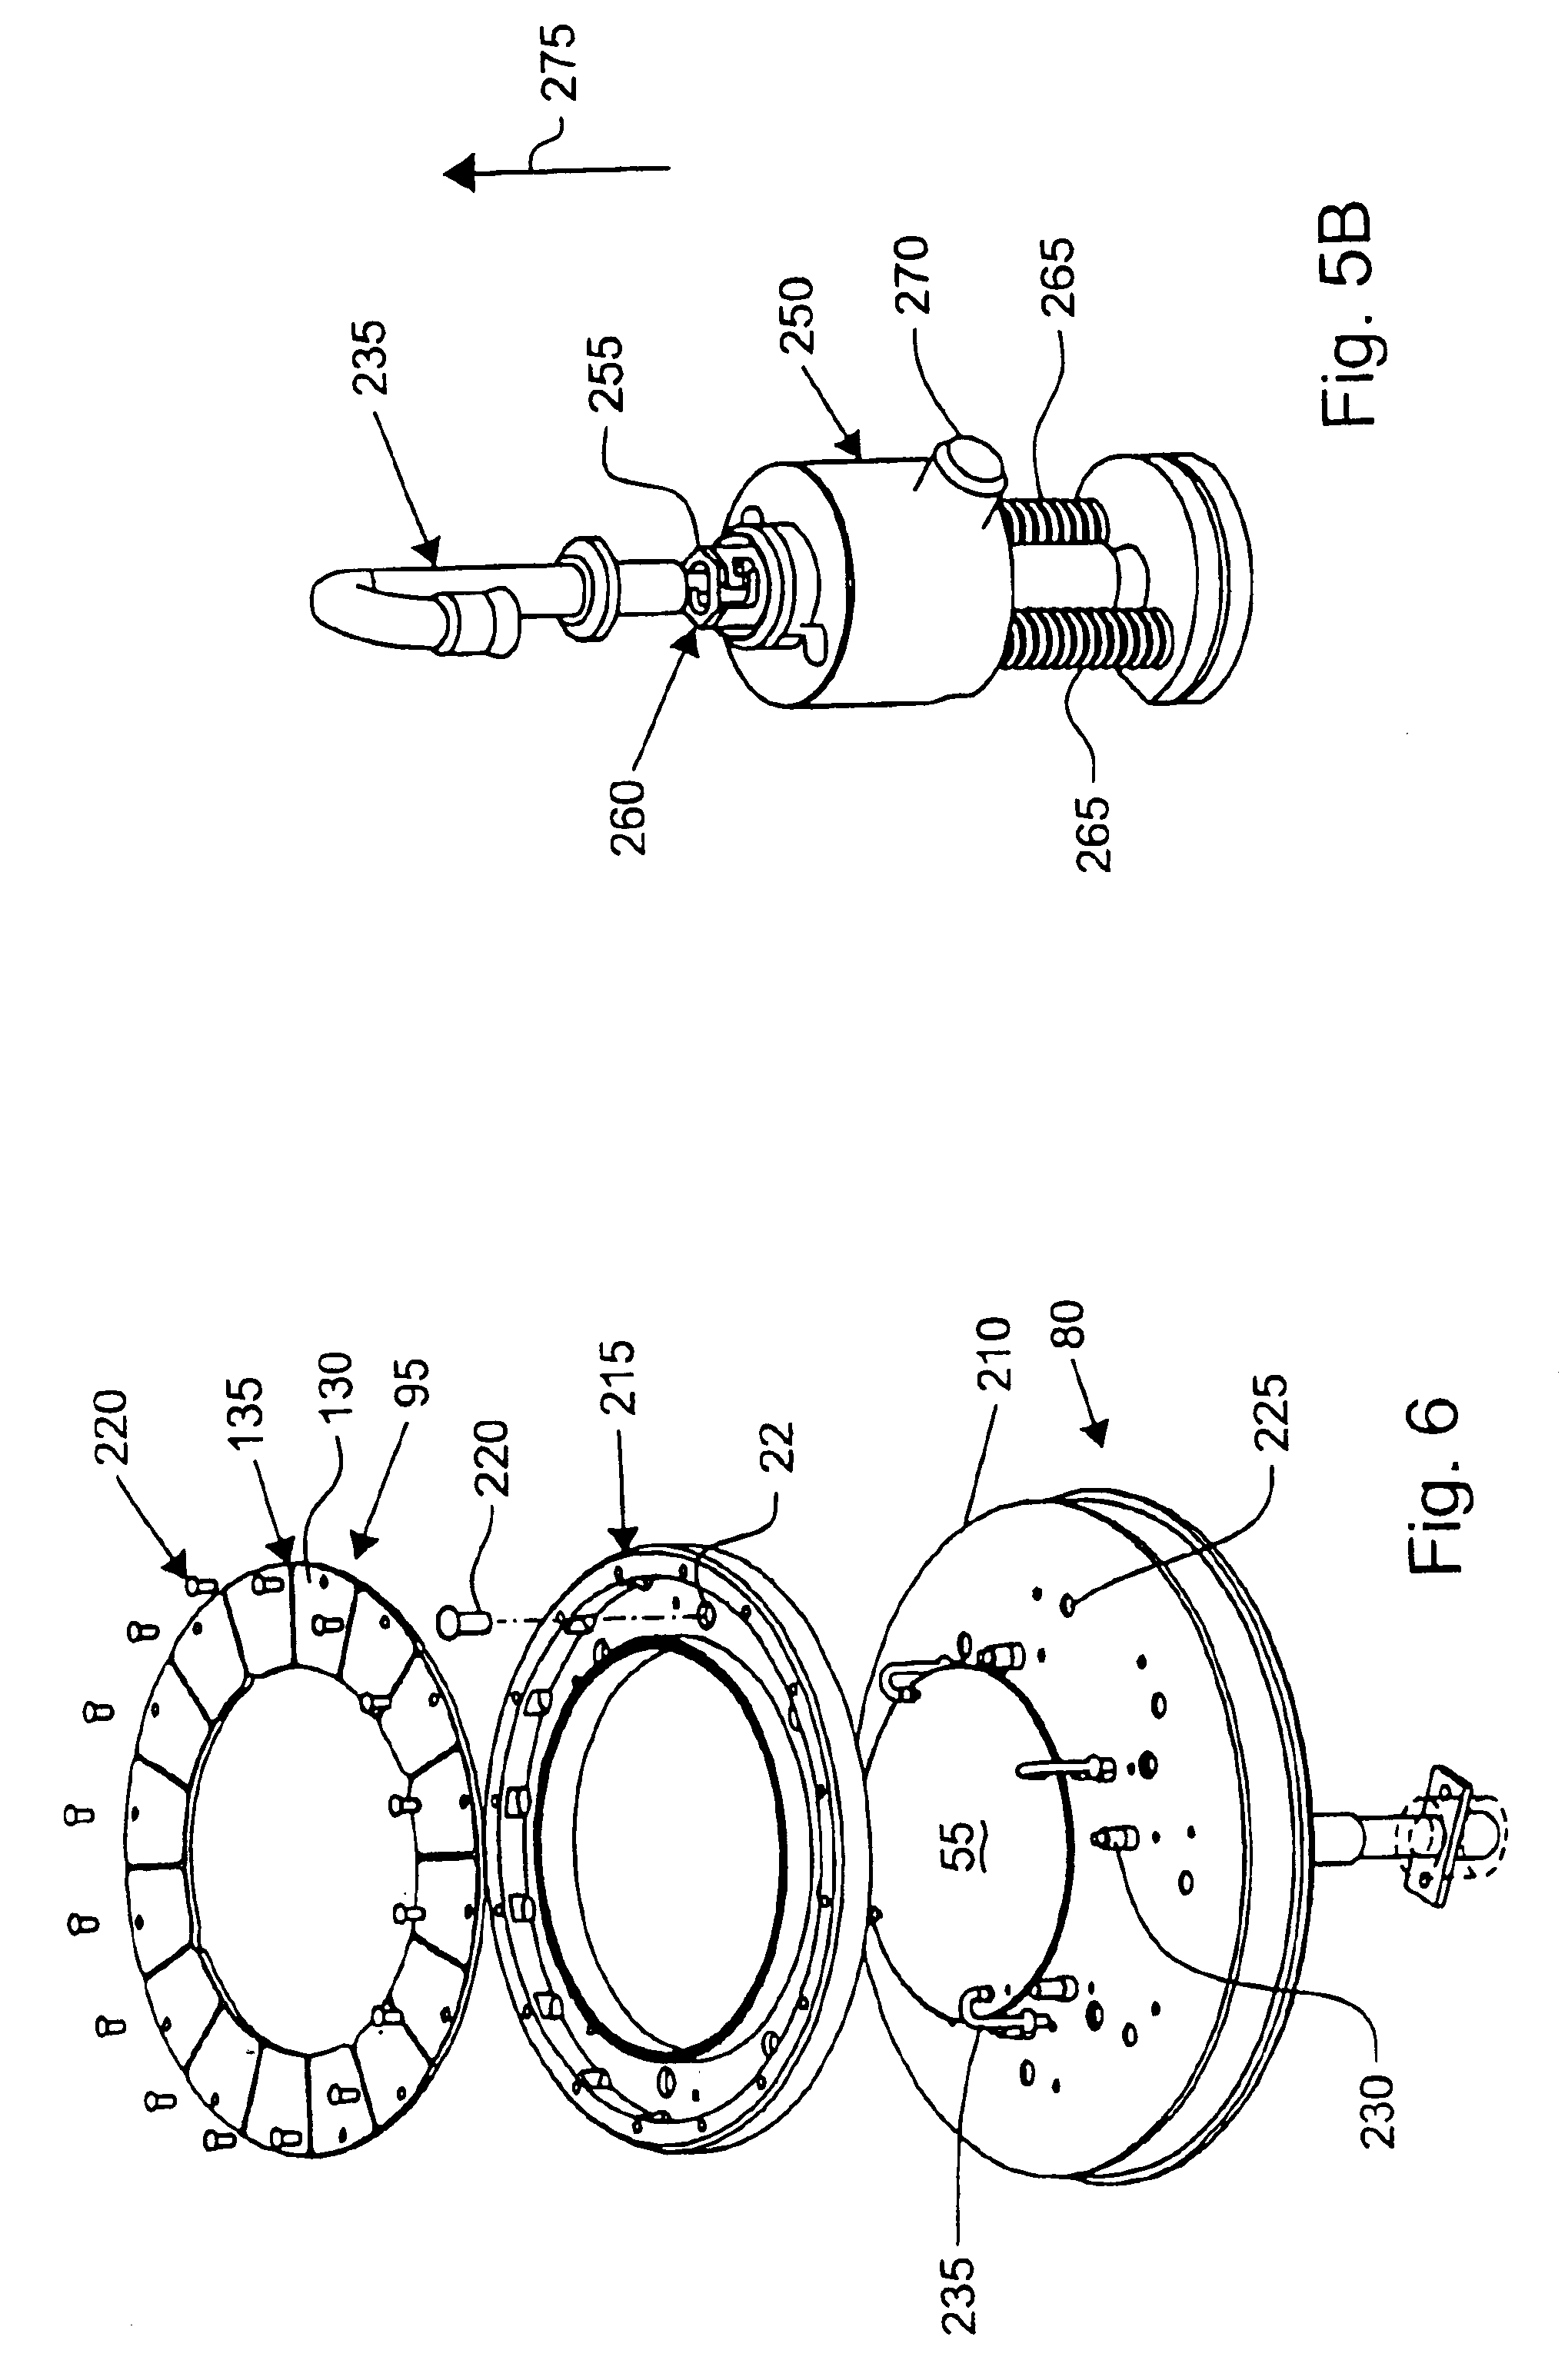 Cathode current control system for a wafer electroplating apparatus